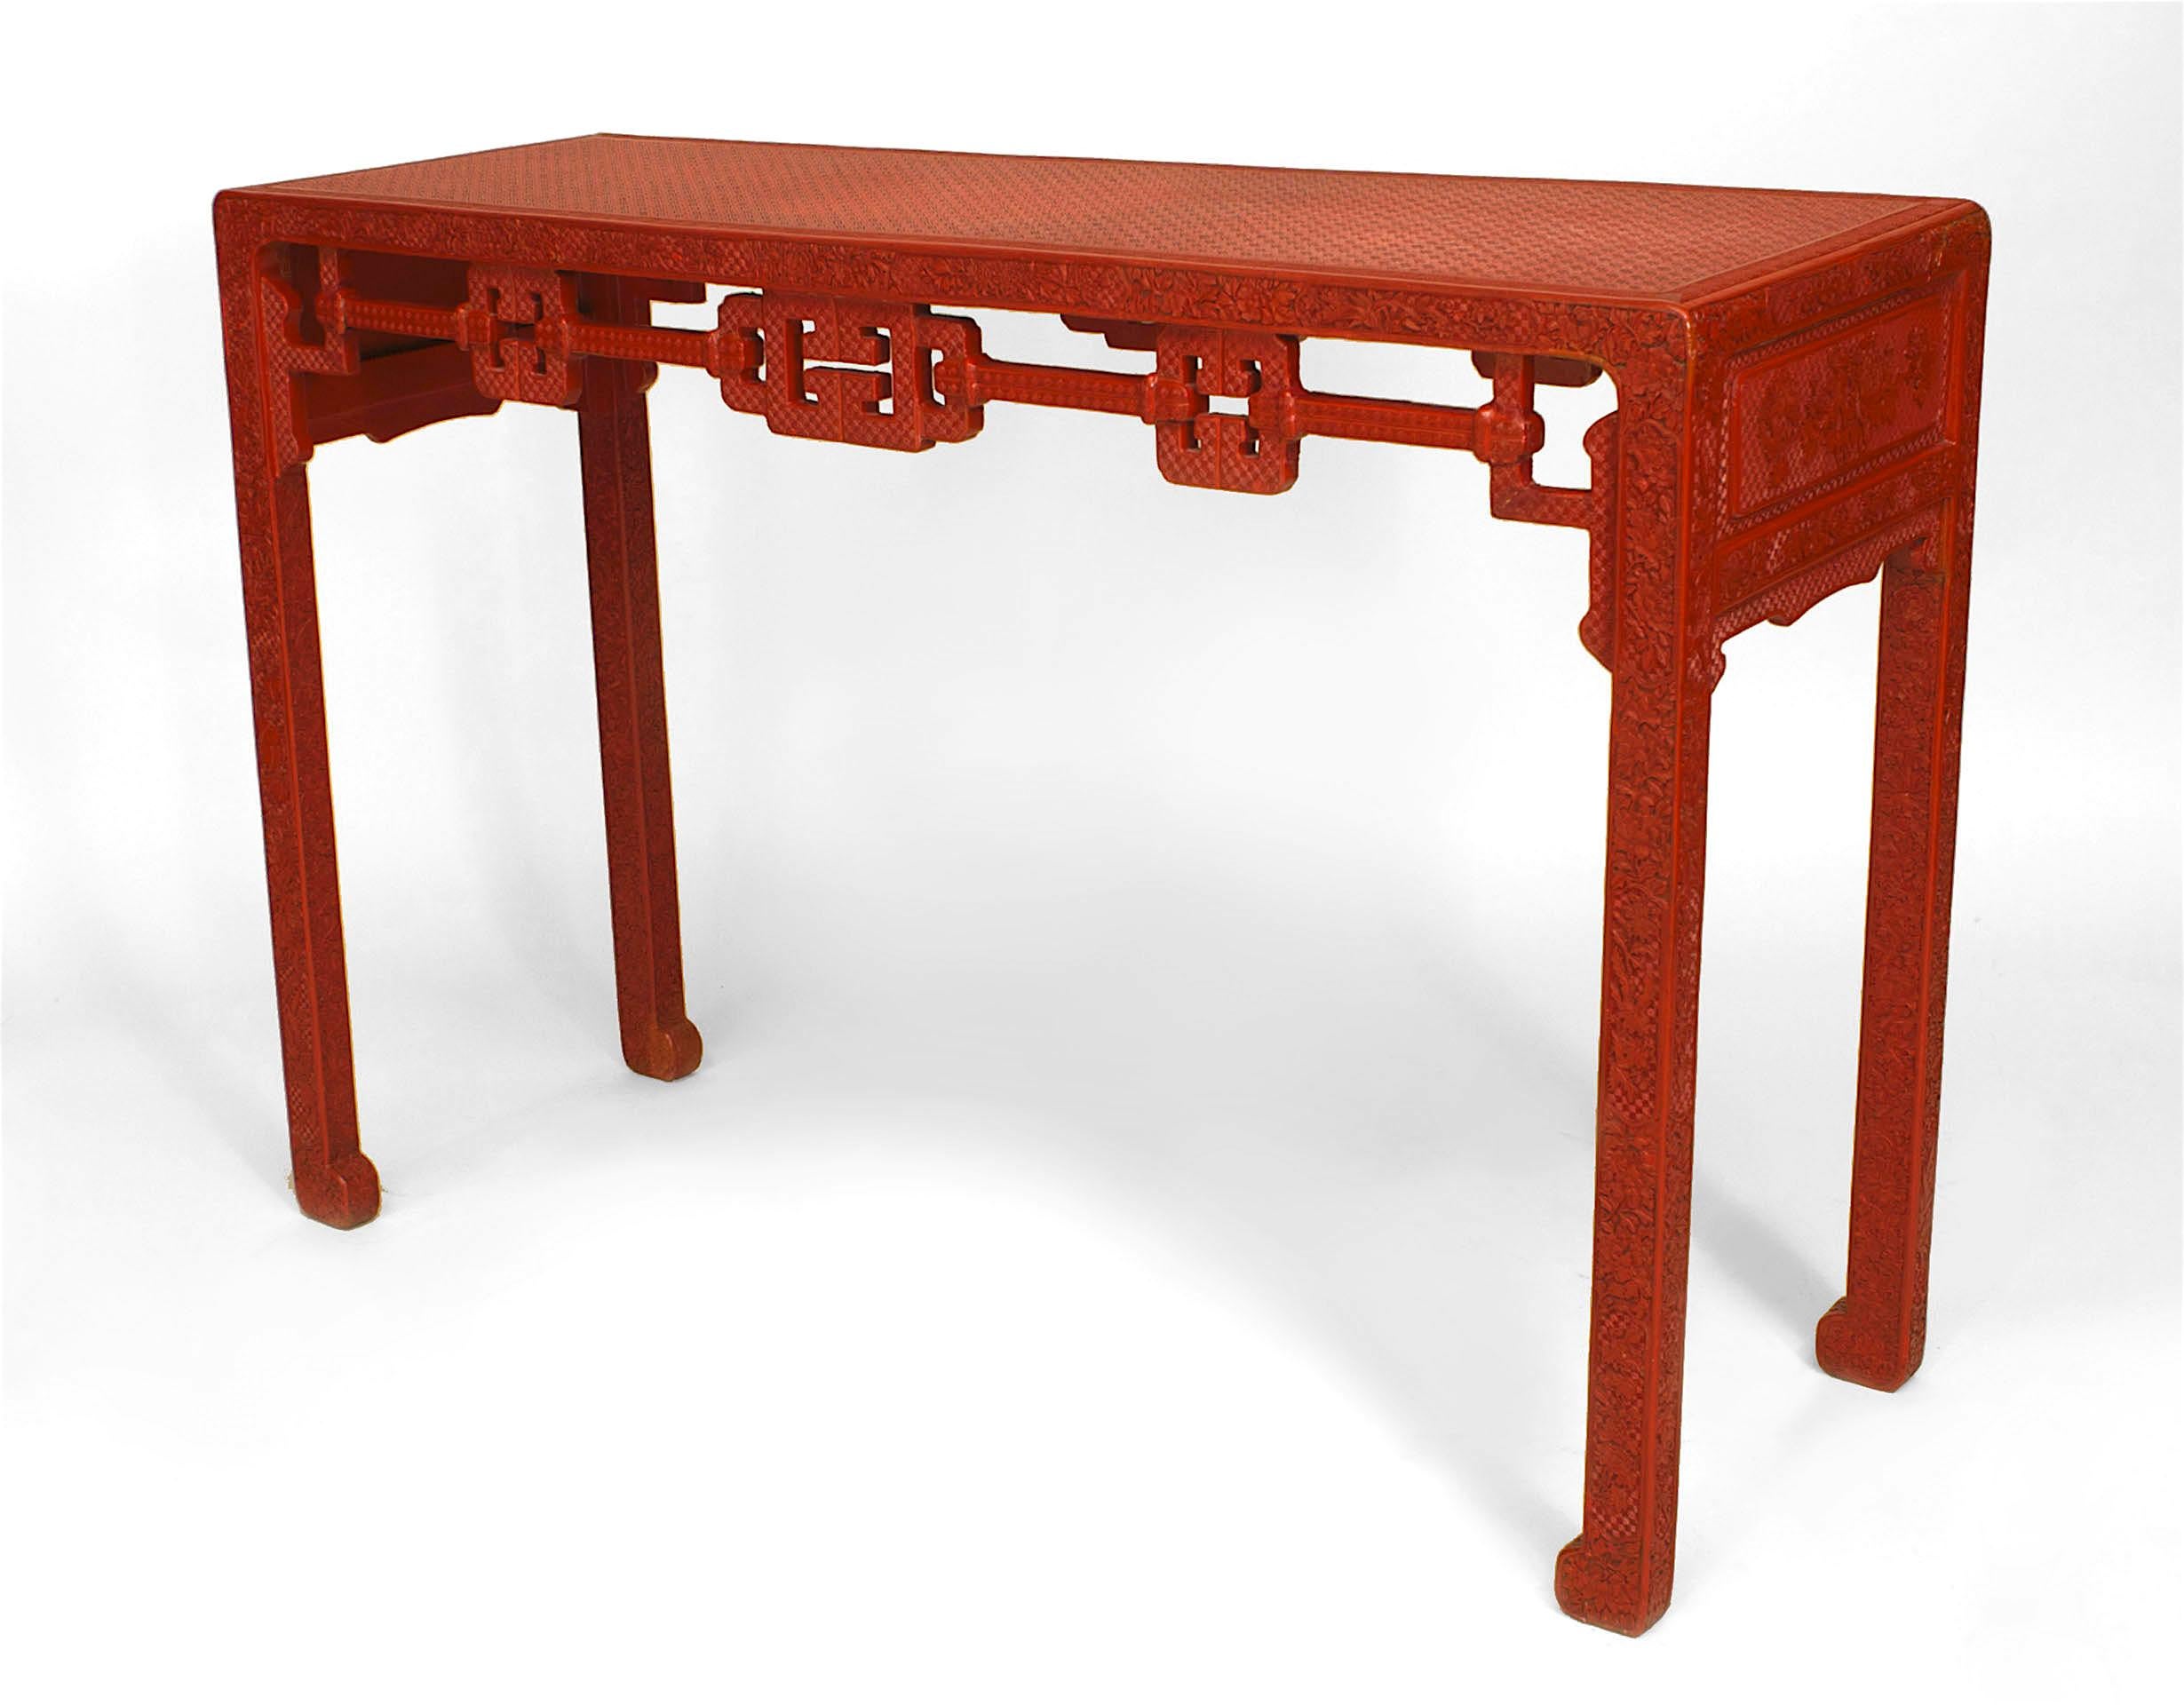 Asian Chinese (18/19th Century) red cinnabar console table with a carved floral design on legs and apron with a geometric design filigree apron and top. (Christie's Richard Himmel Collection)
